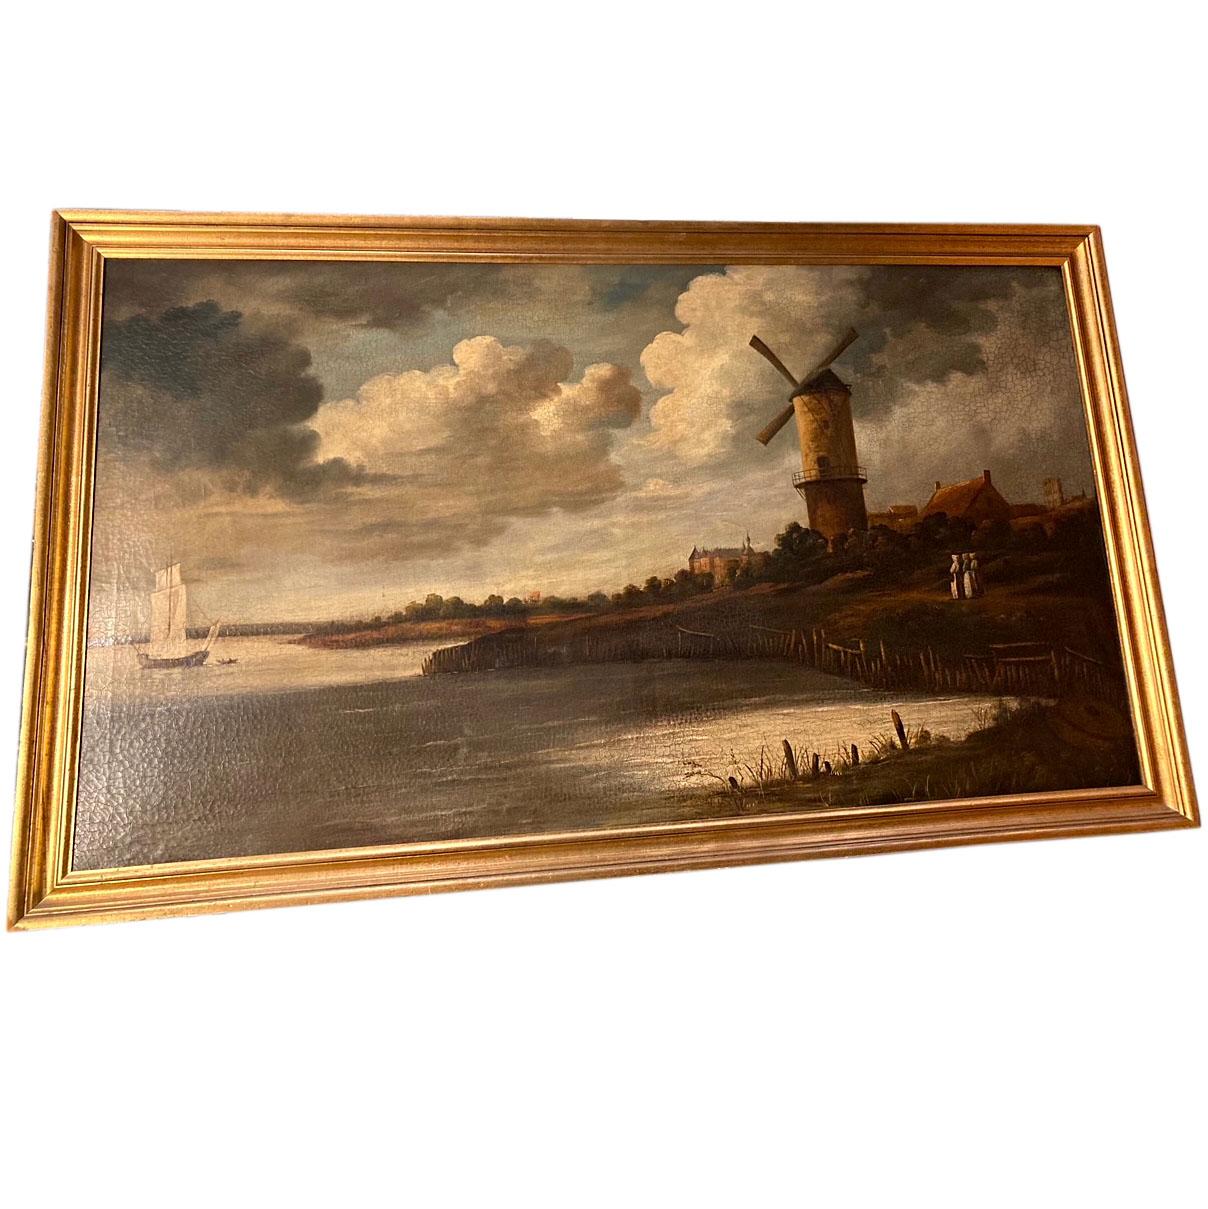 A large circa 1940s Dutch waterside landscape with later frame.

Measurements:
Width 68